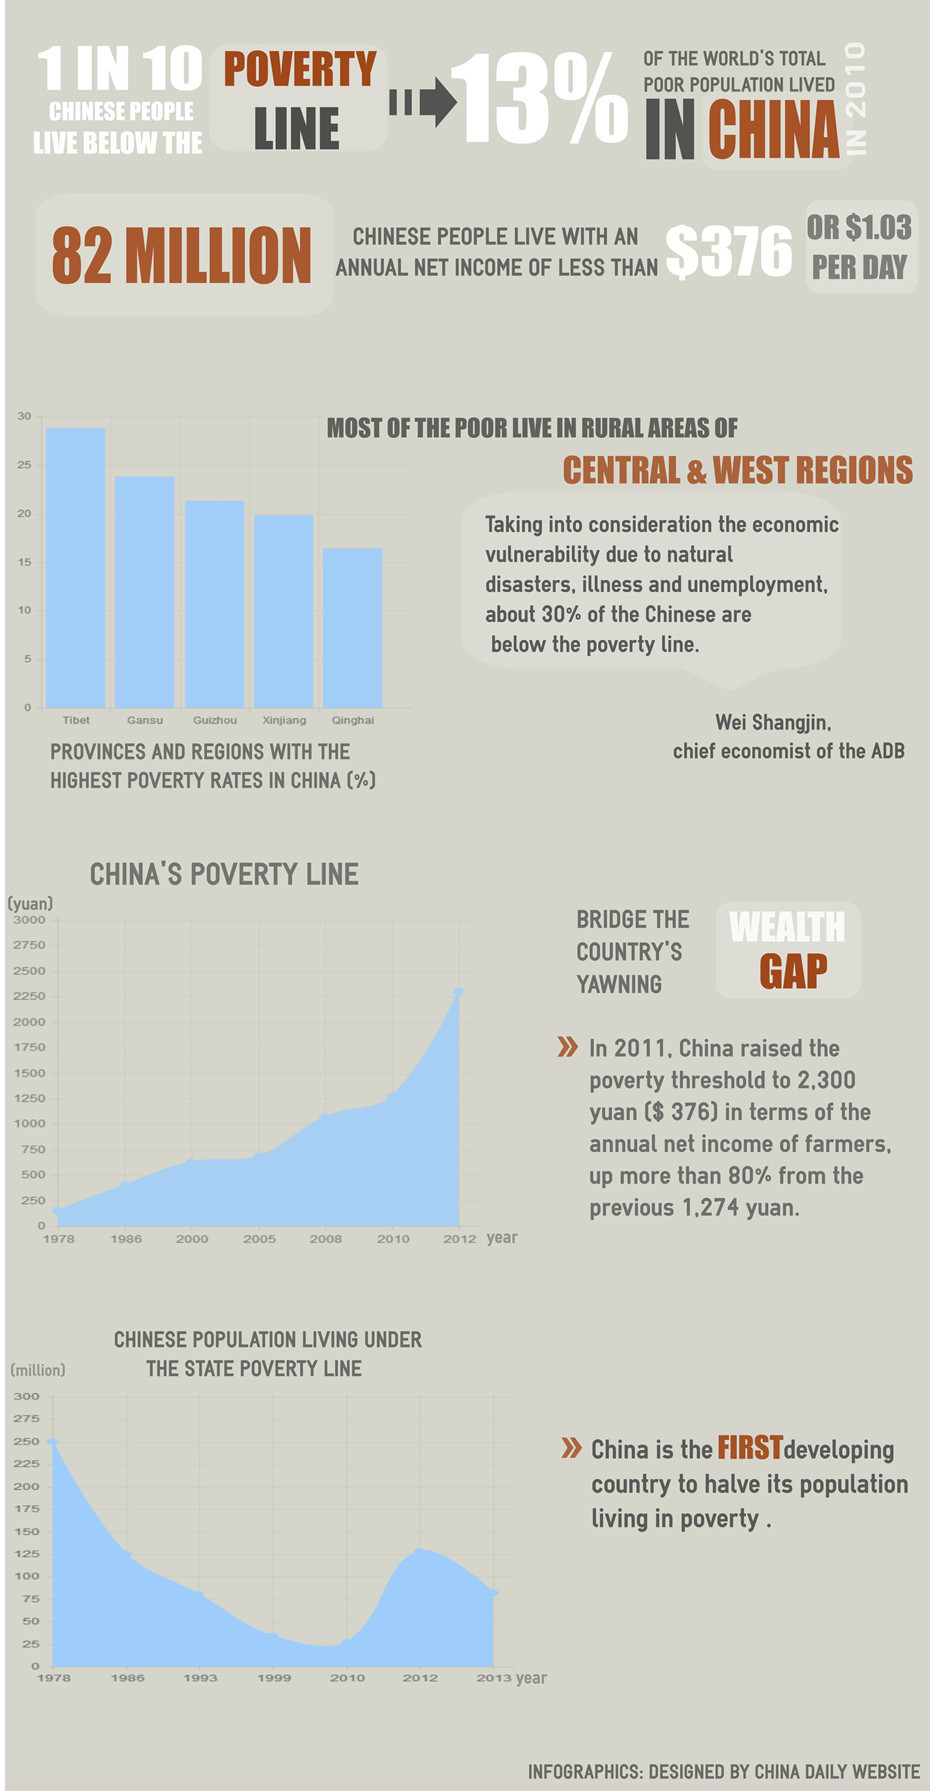 Behind the glamour - poverty in China